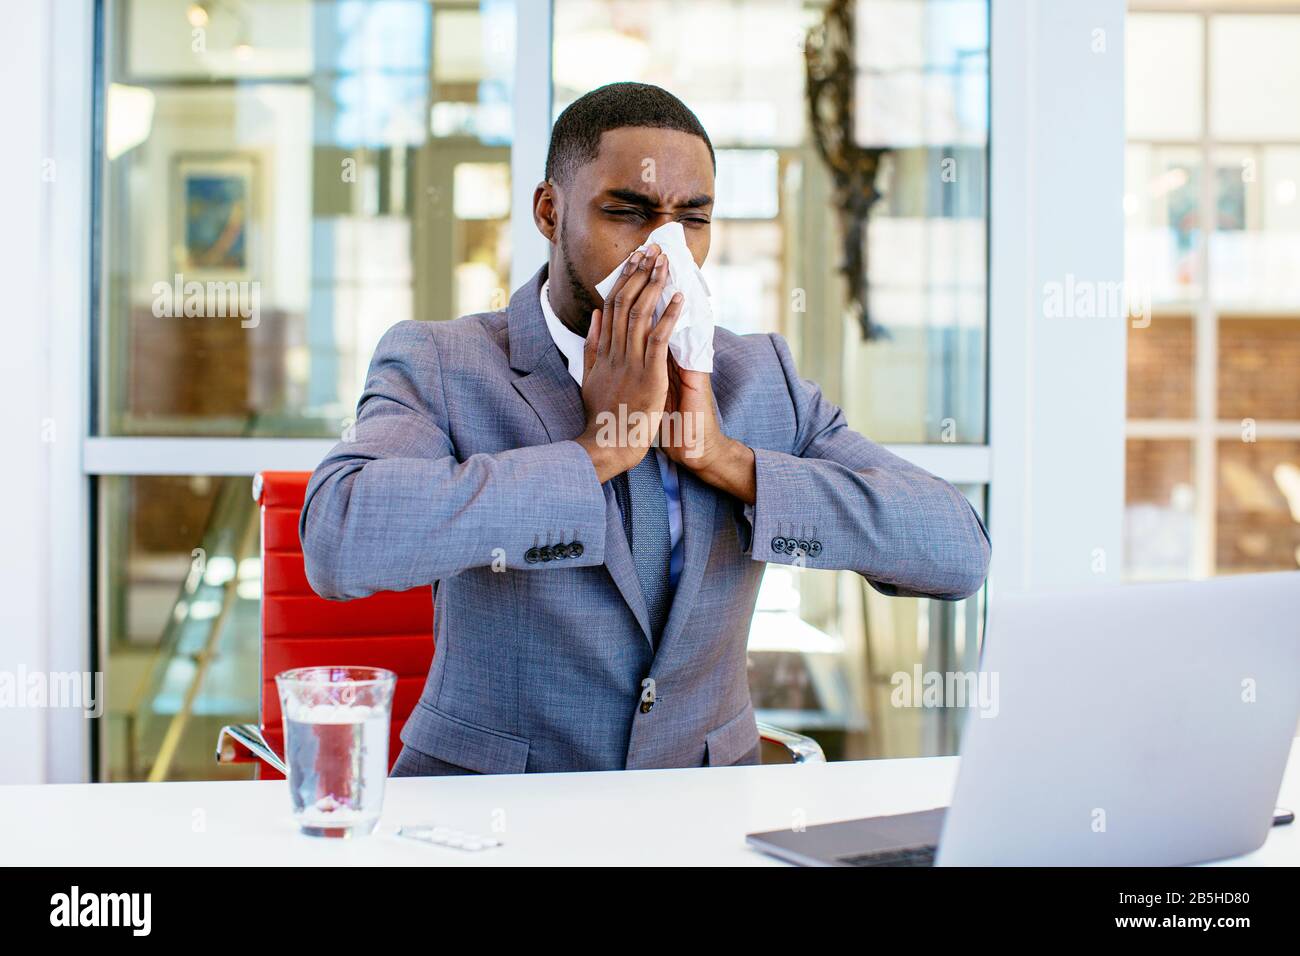 Portrait of a sick young man in business suit blowing his nose while sitting behind desk at work with computer Stock Photo